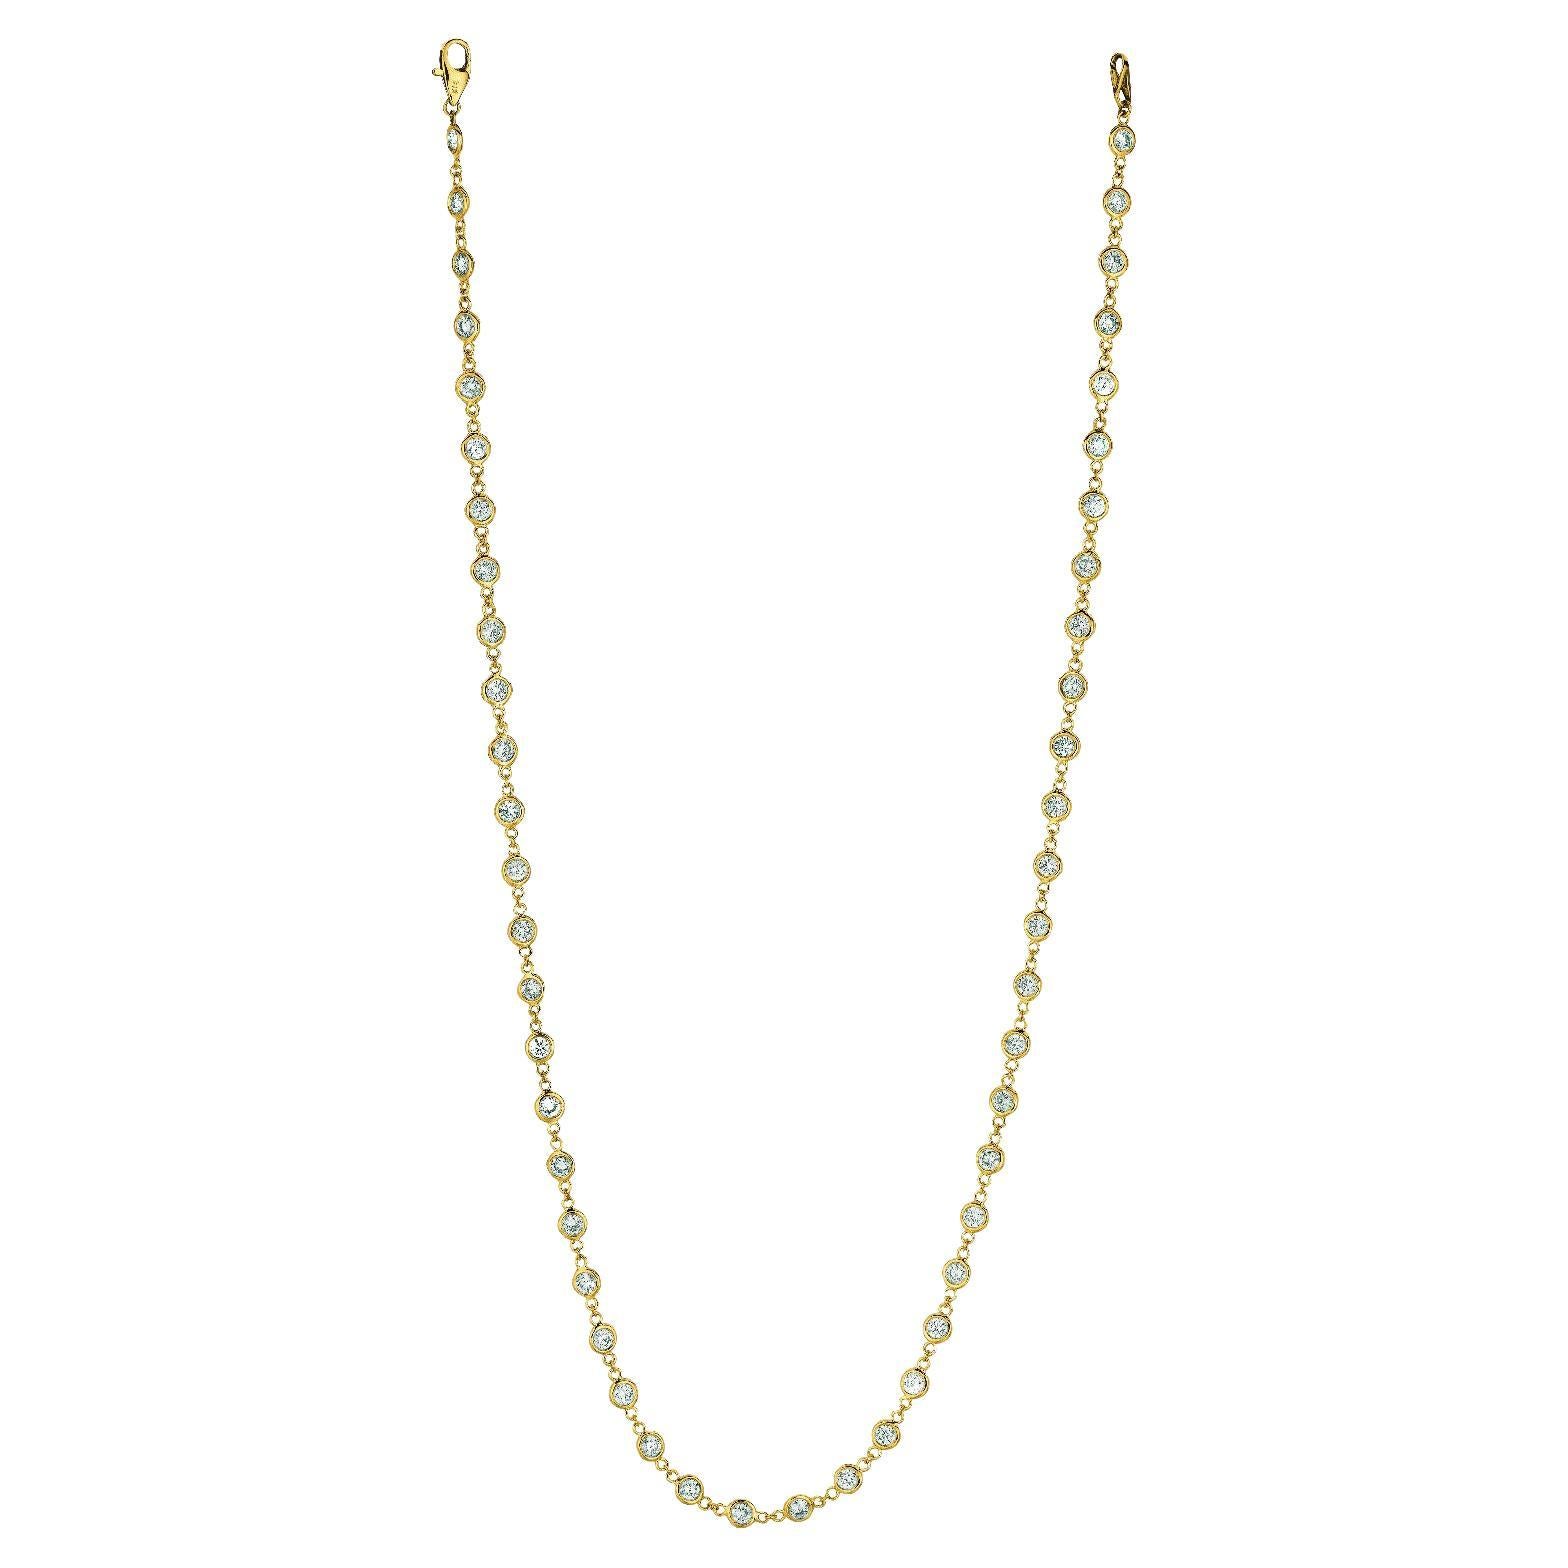 1.51 Carat Diamond by the Yard Necklace G SI 14K Yellow Gold 67 Stones